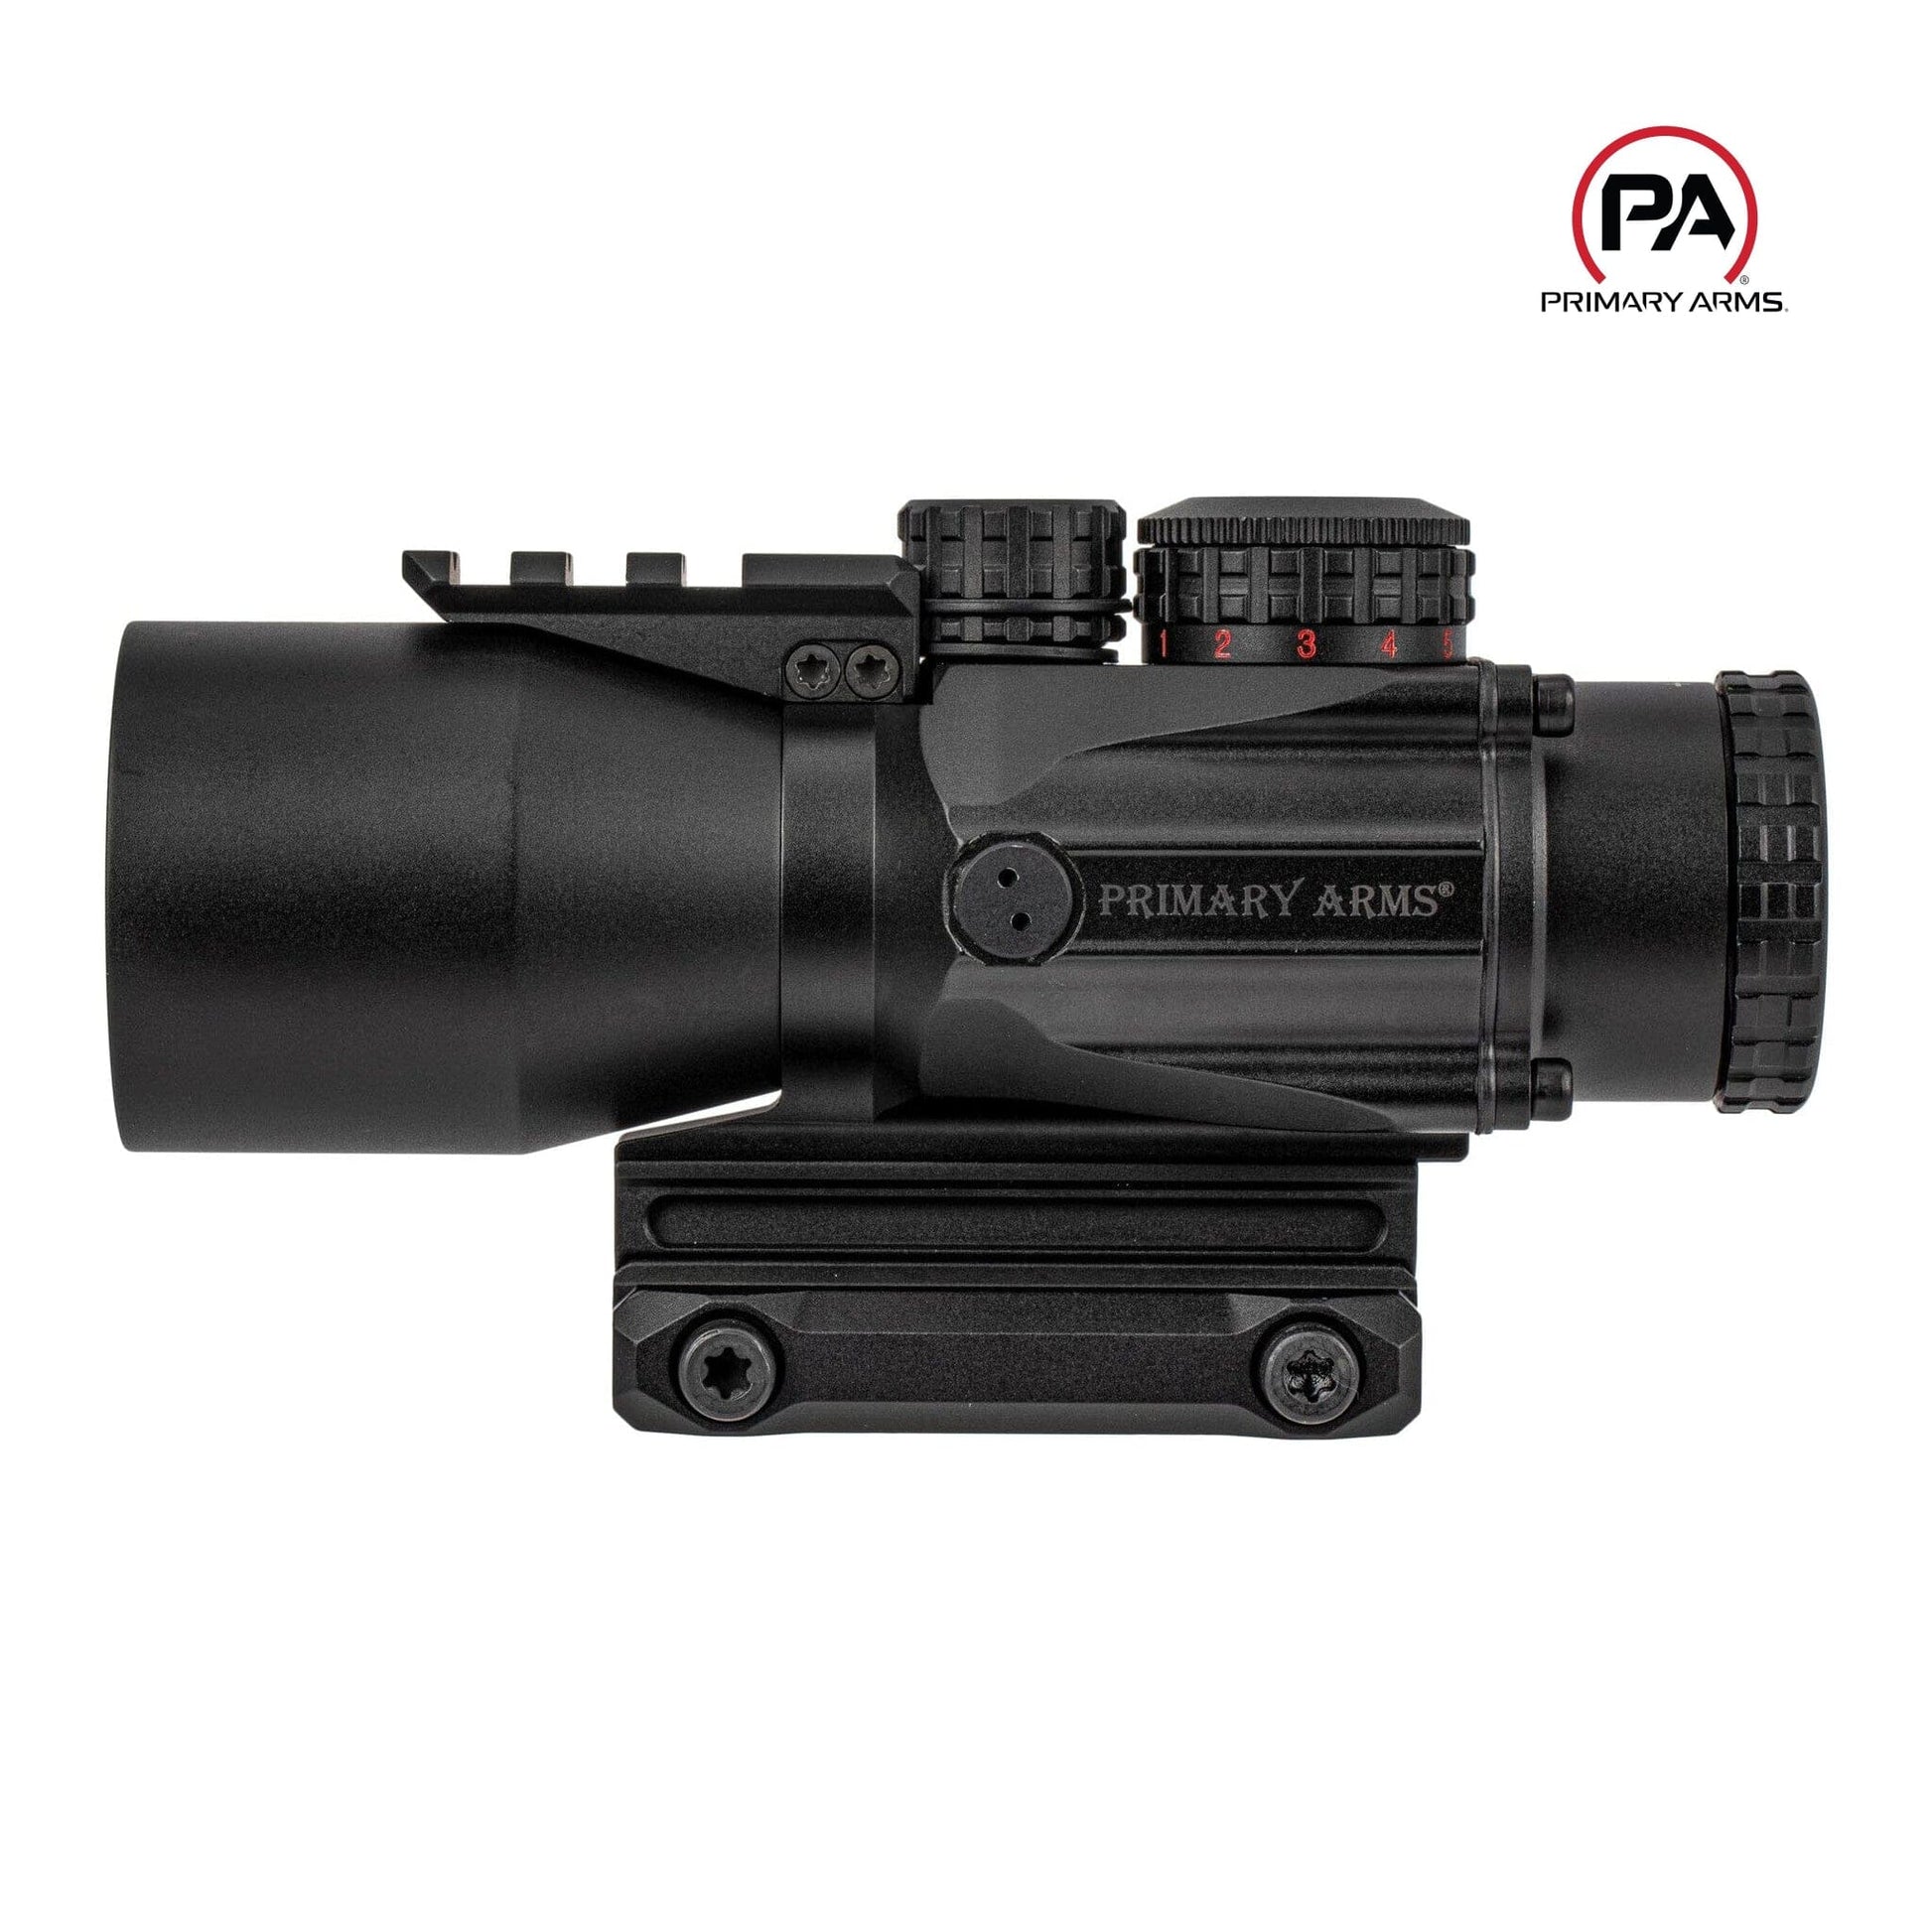 Primary Arms SLx 5x36mm Prism Scope Gen III - ACSS Aurora Reticle Prism Rifle Scope Primary Arms 